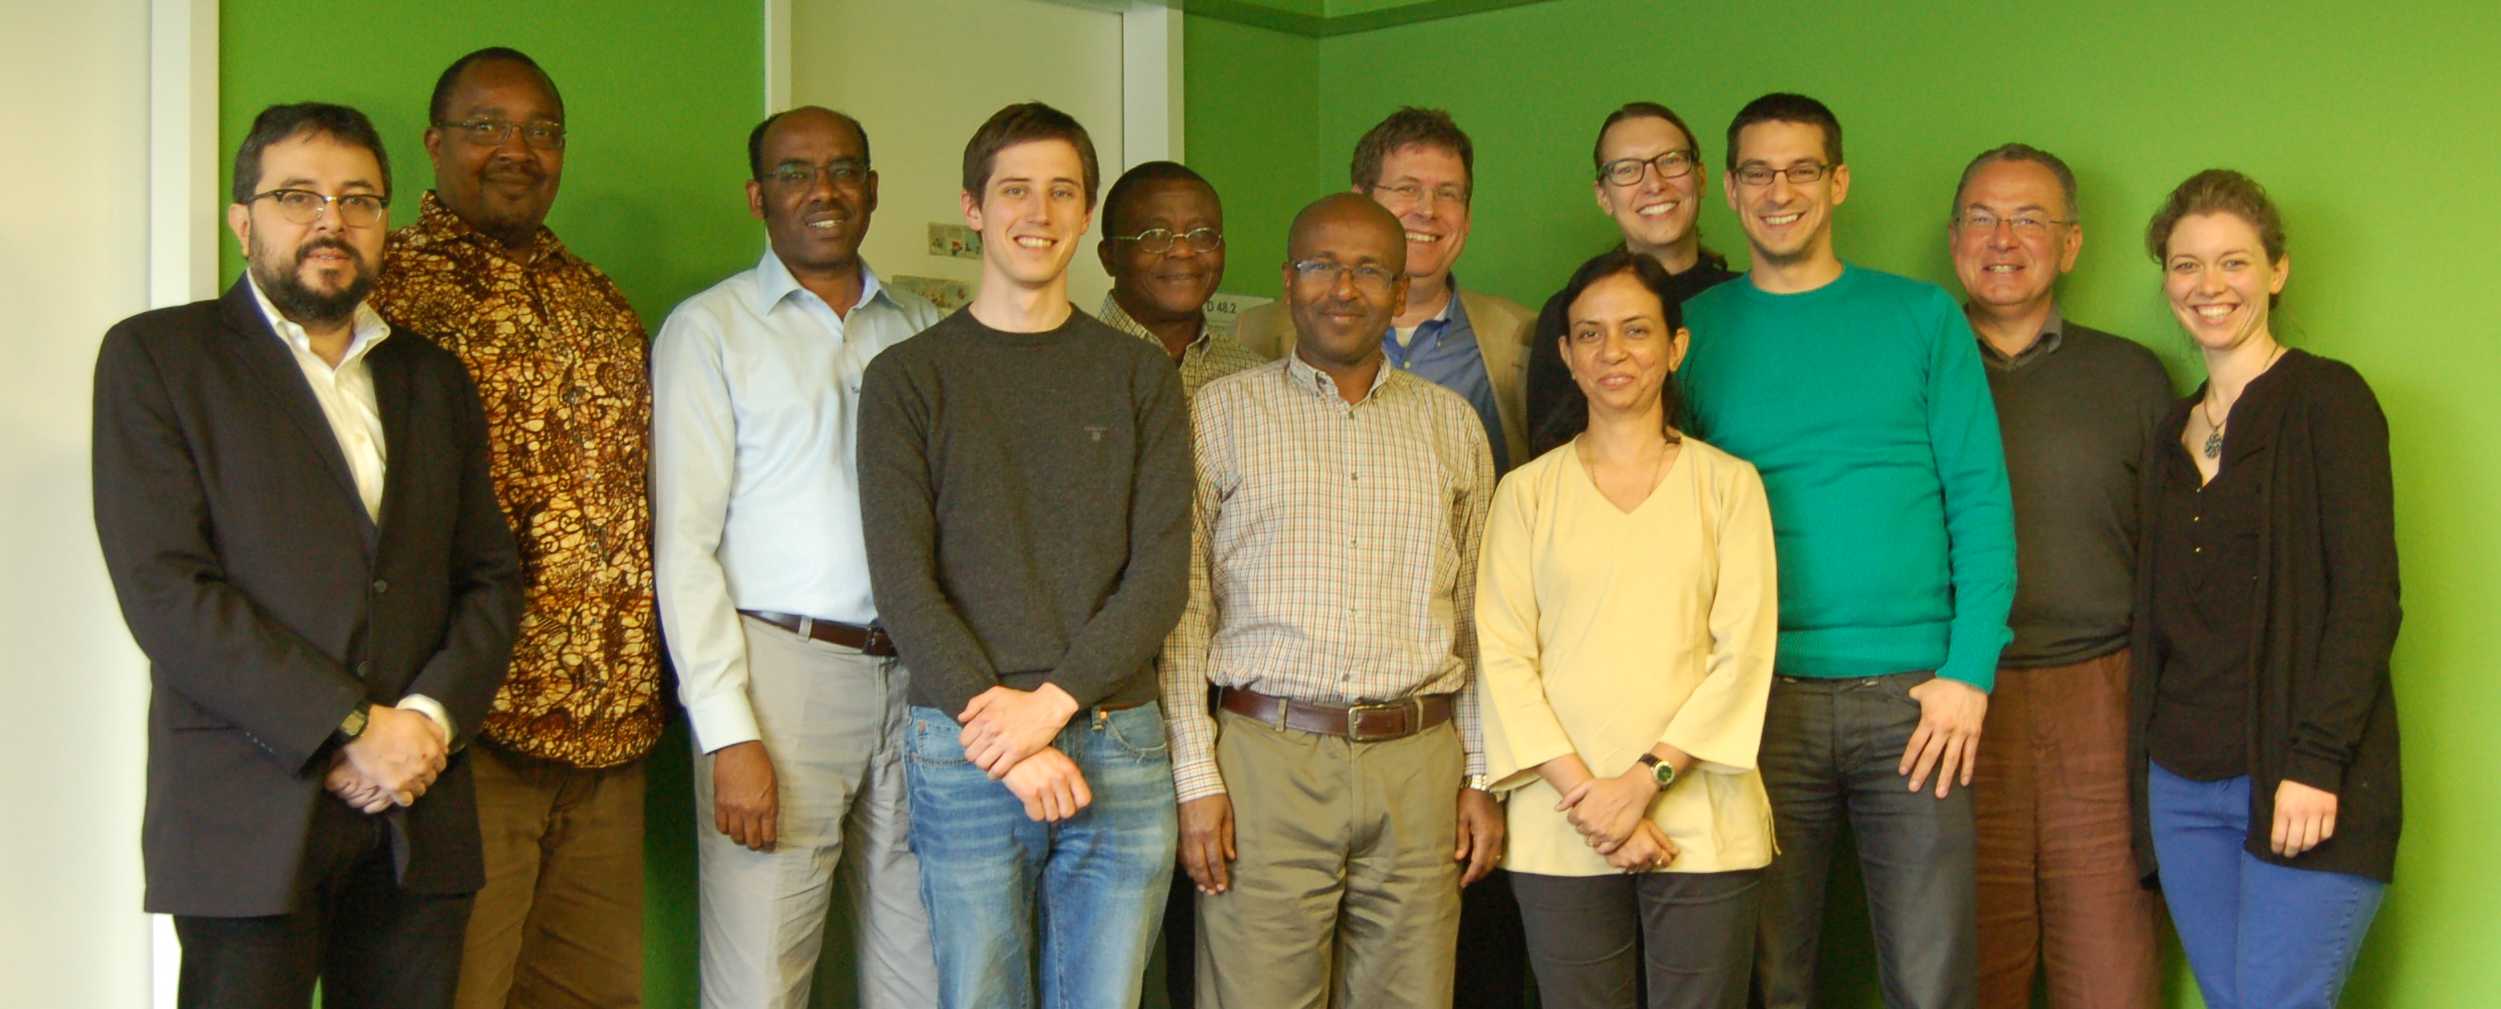 Enlarged view: A group photo of all project participants who attended the r4d kick-off meeting in May 2014.